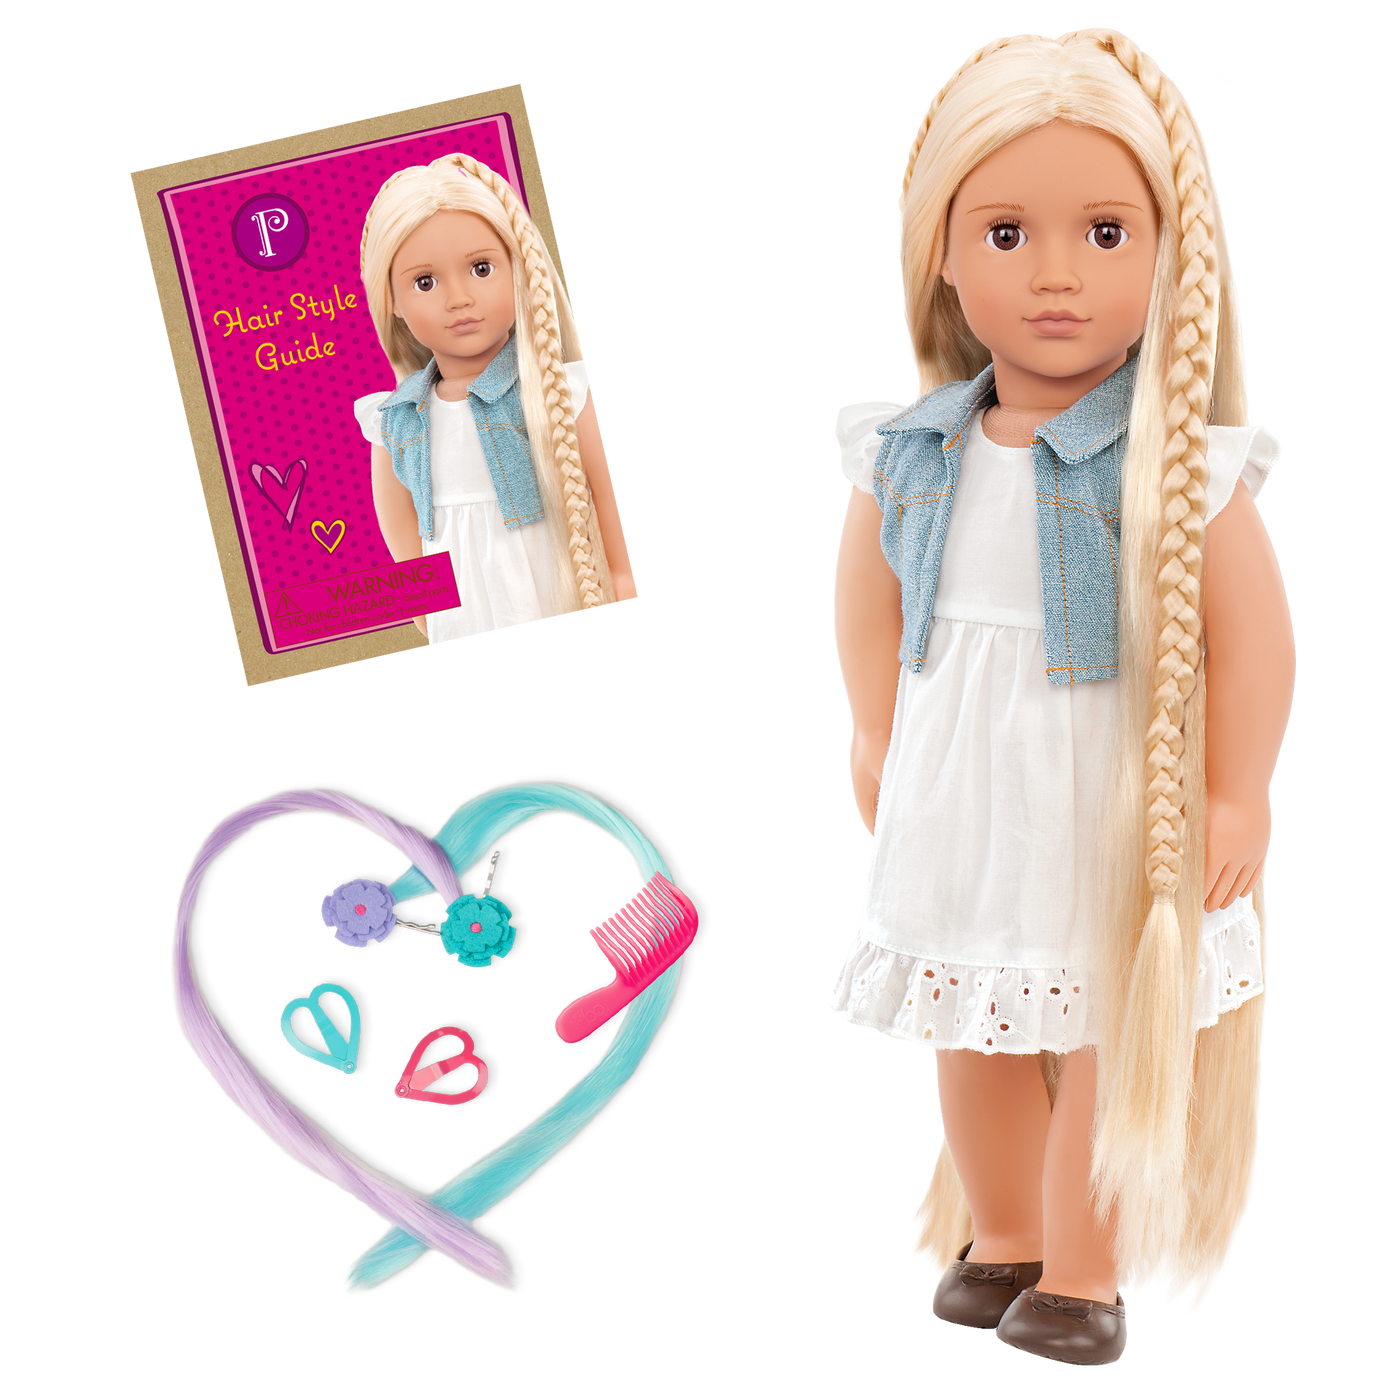 18-inch doll with blonde hair, brown eyes and extensions